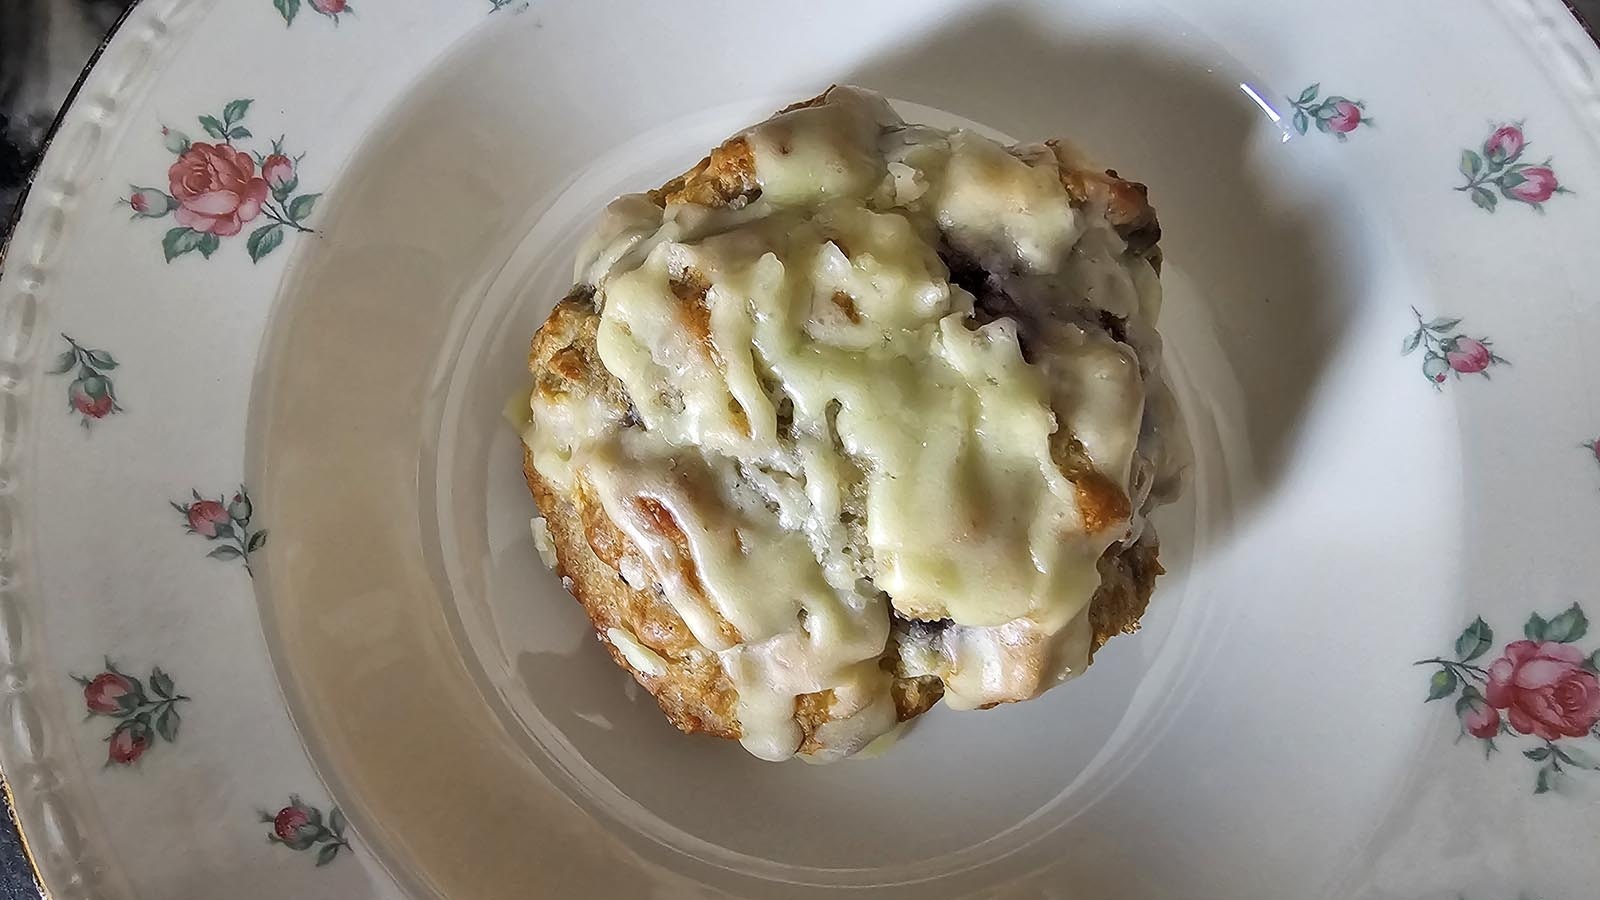 A lemon blueberry scone from The Bread Doctor bakery in Torrington. The state of both lemon and blueberries was perfectly balanced, and bright.